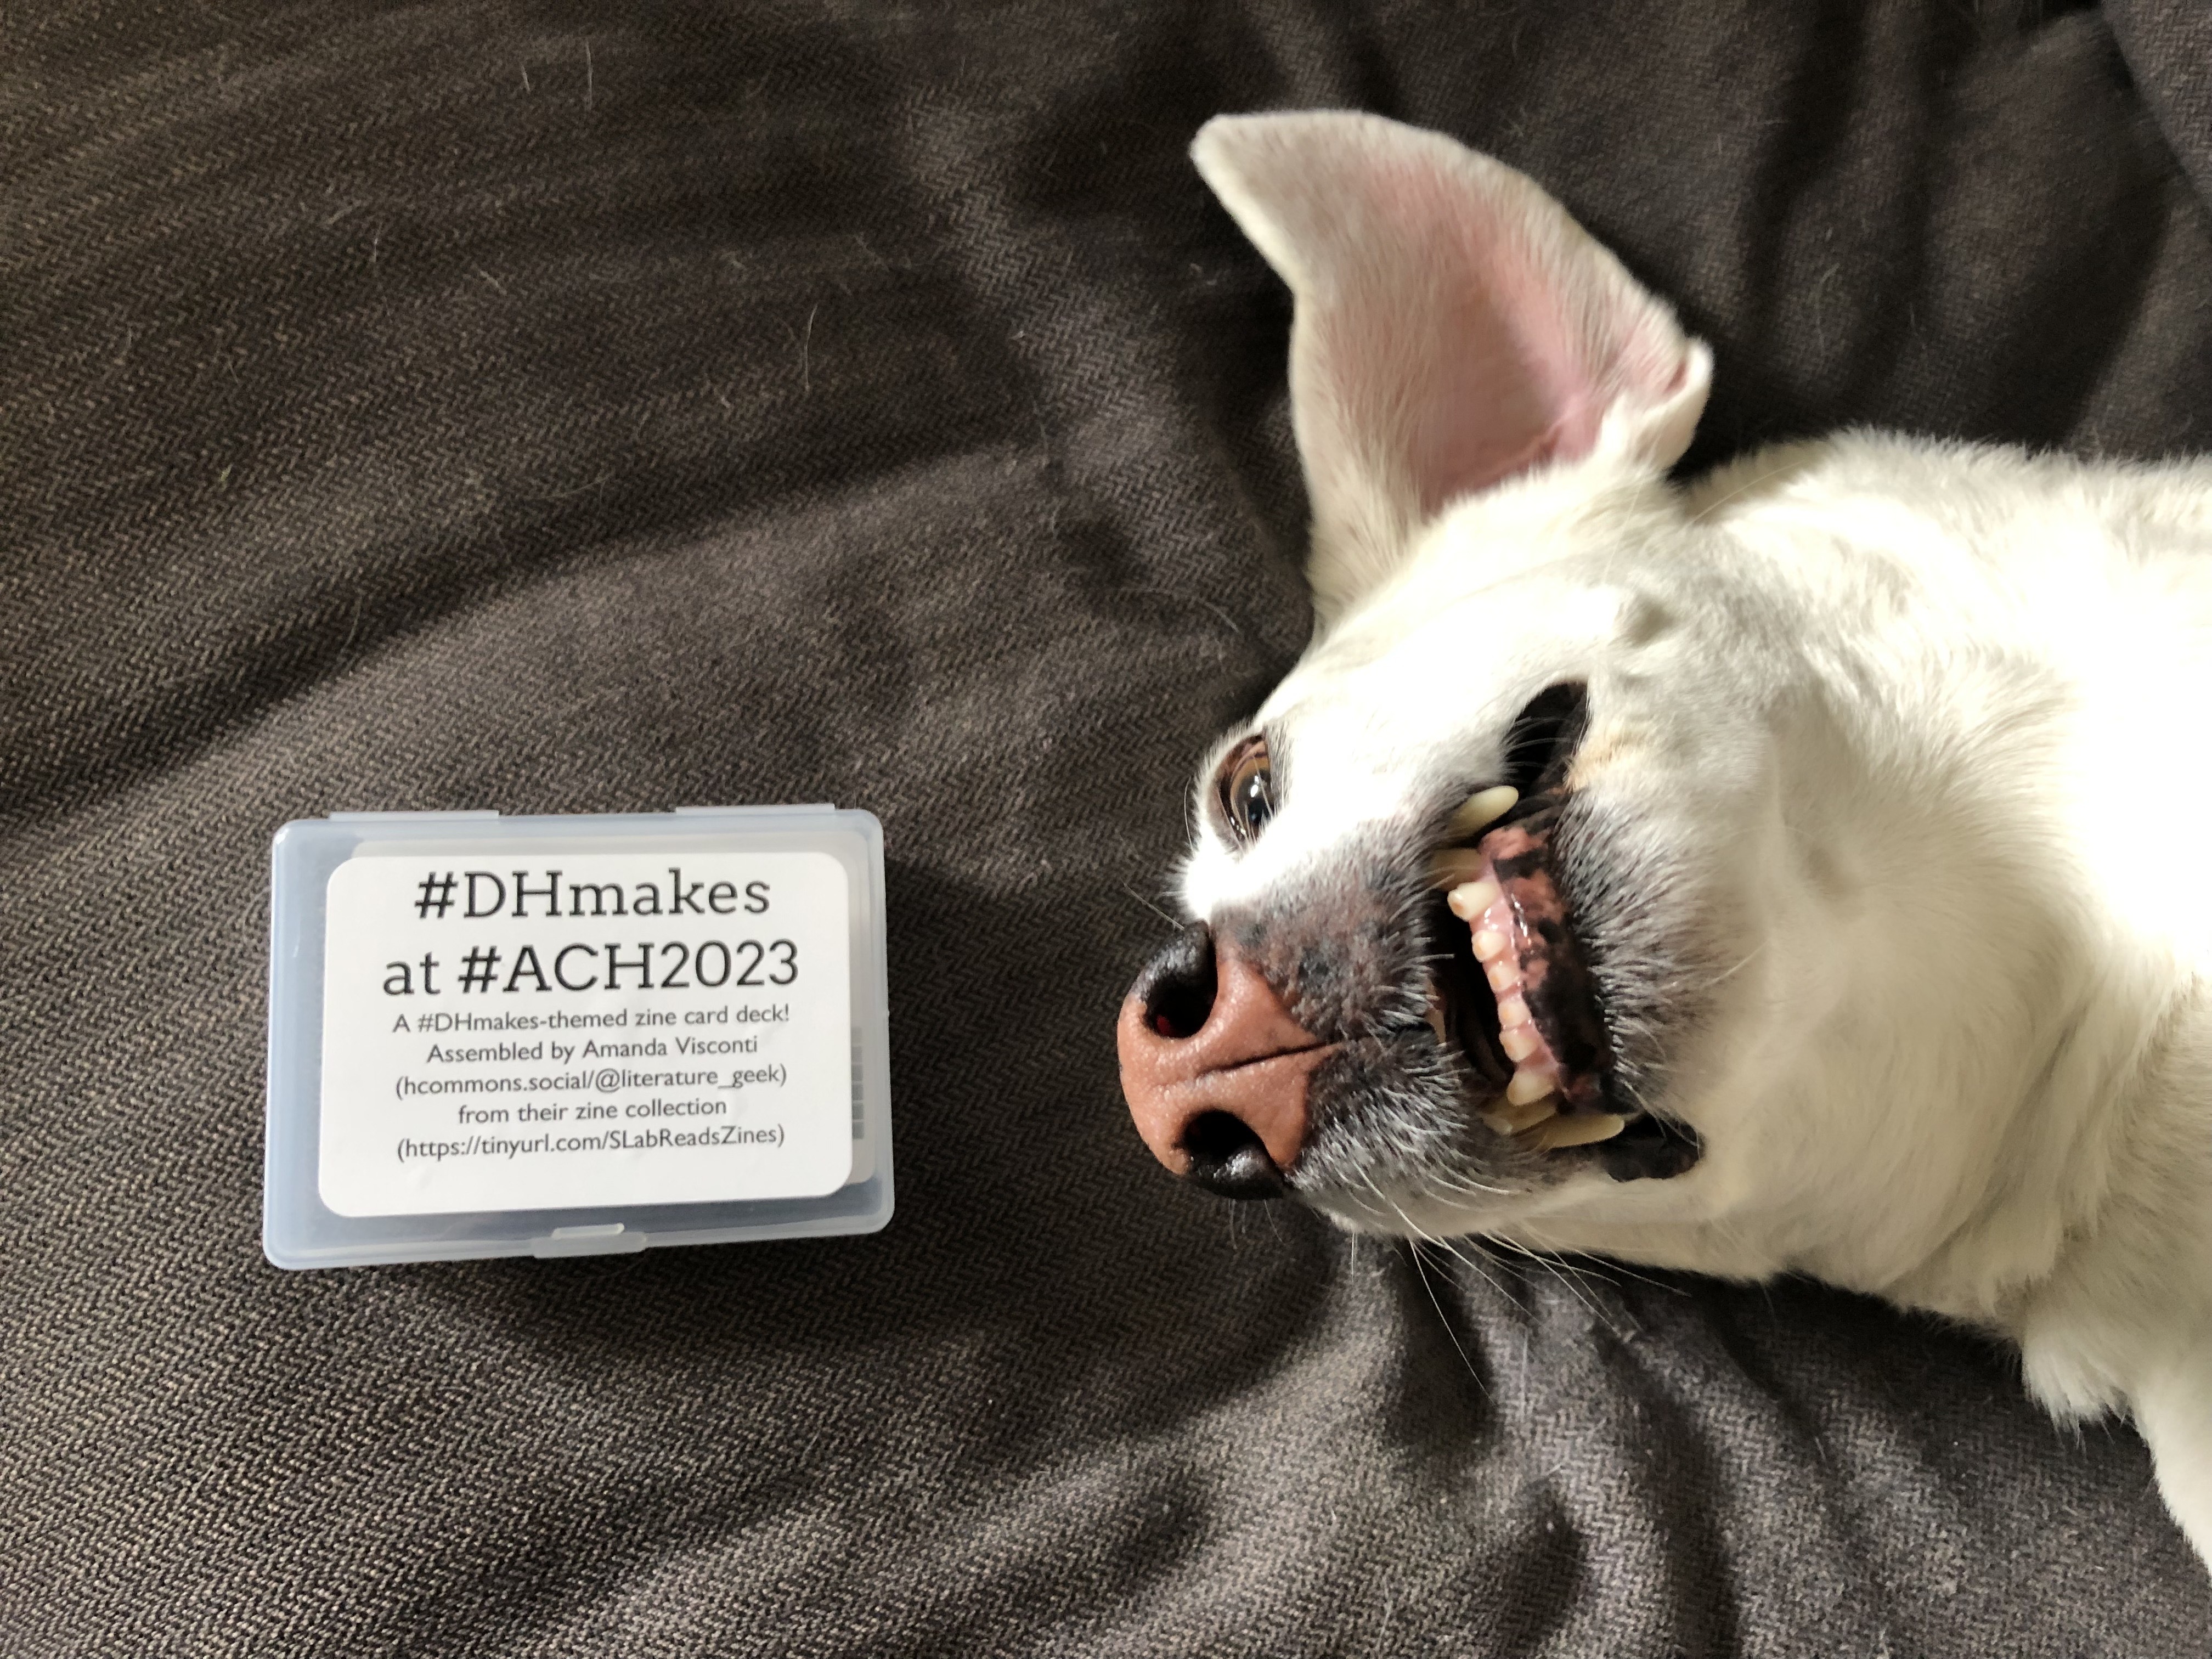 Photo of a plastic card deck case with a cover that reads "#DHmakes at #ACH2023. A #DHmakes-themed zine card deck! Assembled by Amanda Visconti (hcommons.social/@literature_geek) from their zine collection (https://tinyurl.comSLabReadsZines). The case is next to a dog's head; the dog is upside down and grinning.